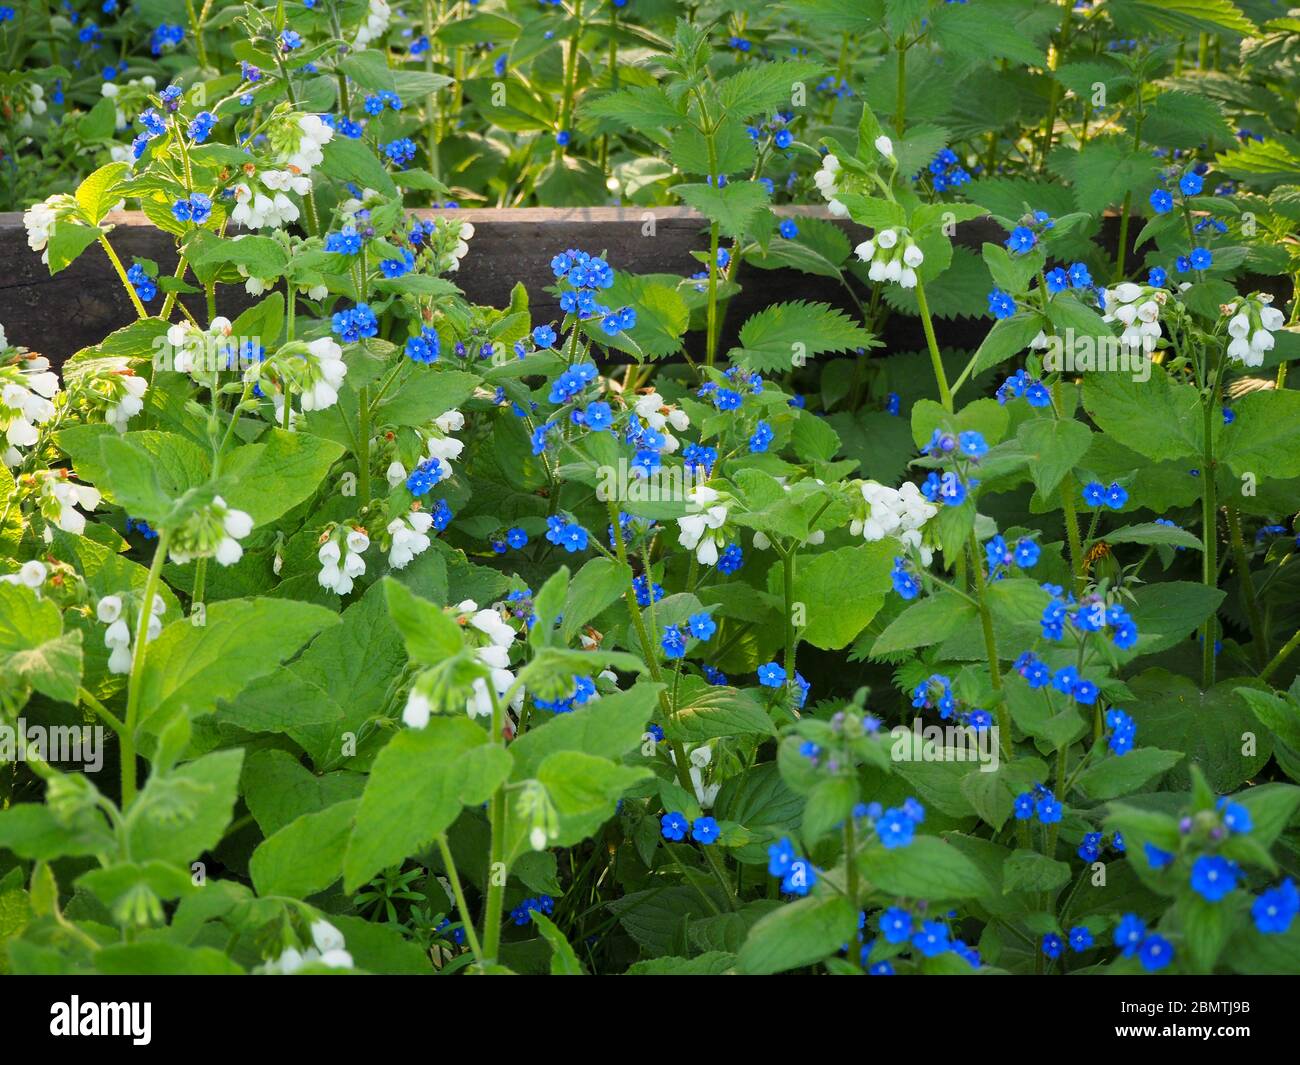 Wild flowers by the fence at Chenies. White Comfrey and Green Alkanet in bloom. Stock Photo